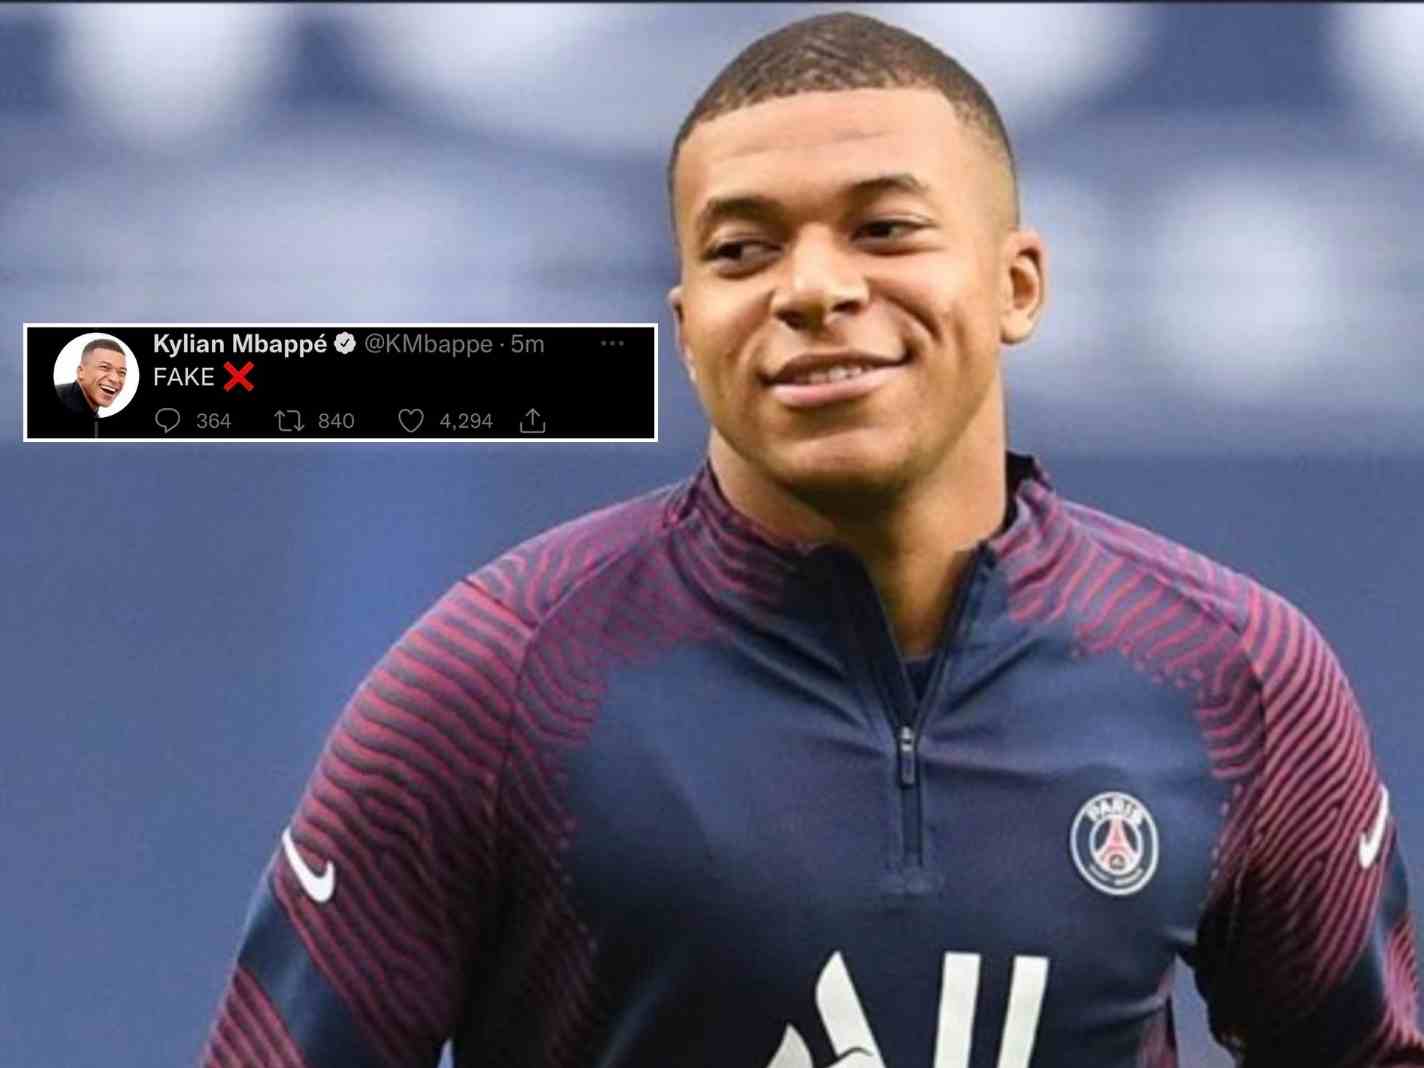 Kylian Mbappe denounces report he is demanding 14 figures to be cut from PSG